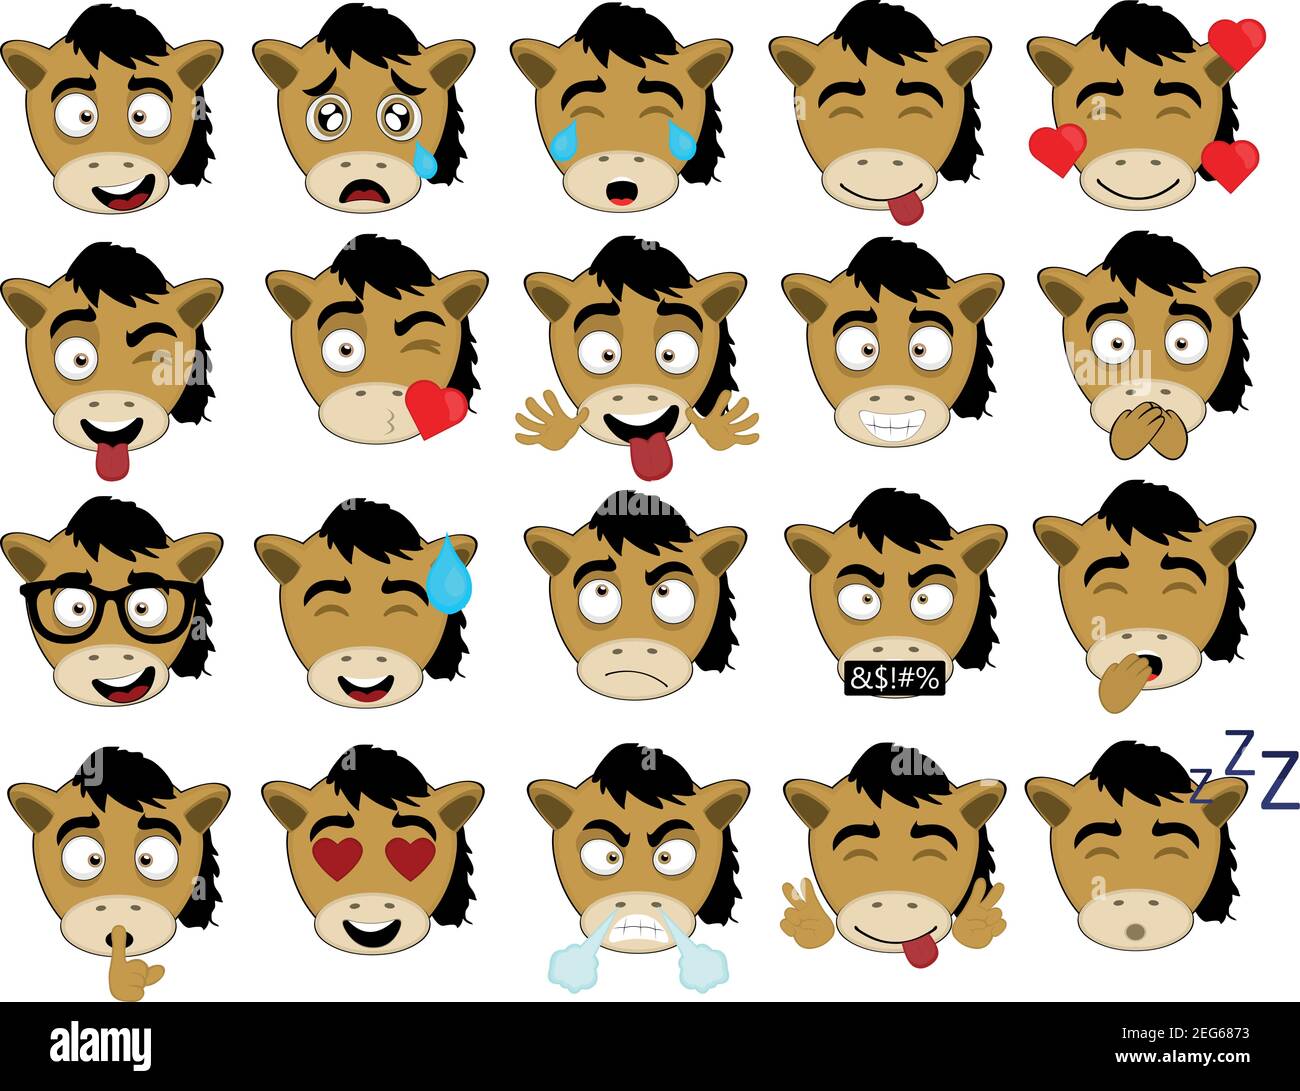 Vector illustration of cartoon horse face expressions Stock Vector